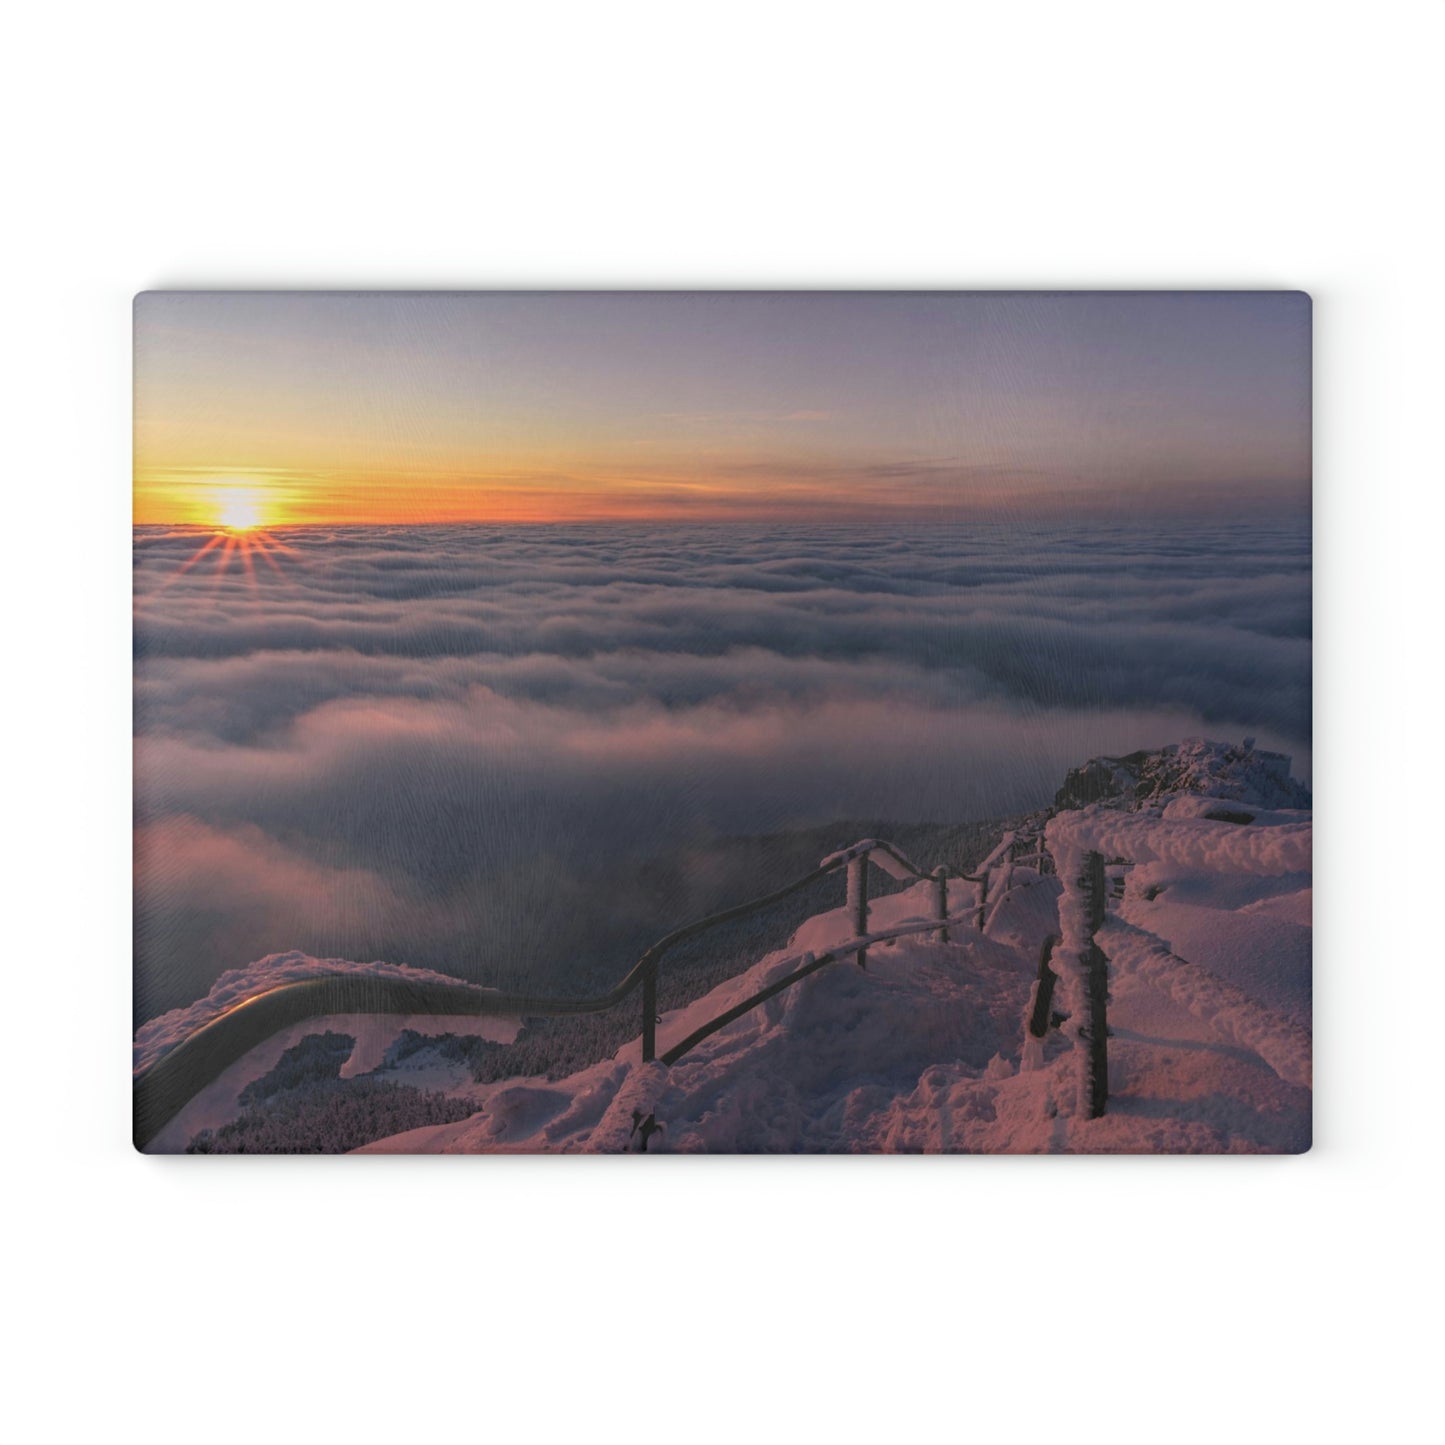 Glass Cutting Board - Stairway to Heaven, Whiteface Mt.